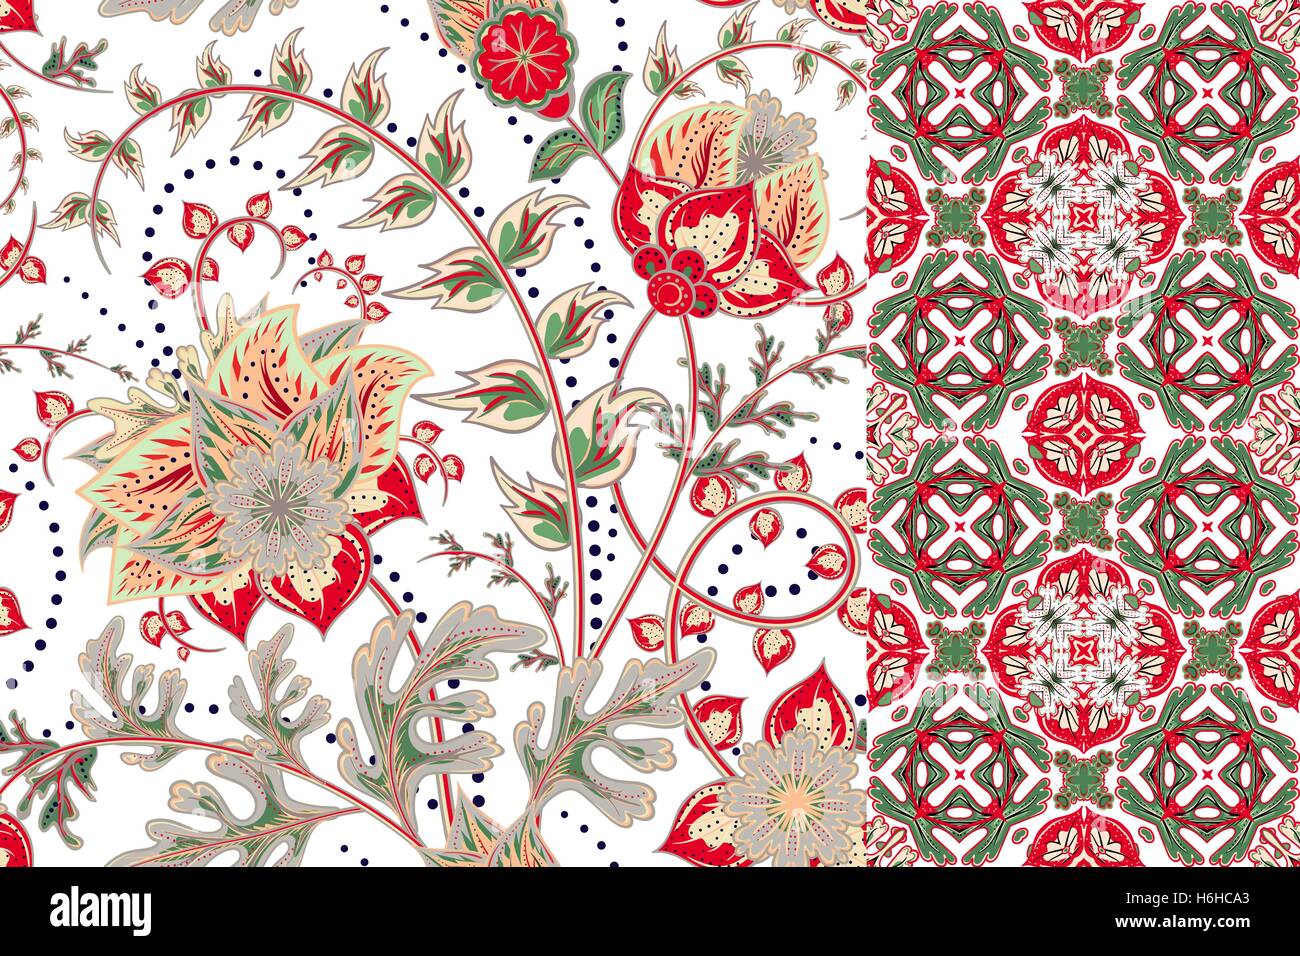 Seamless floral patterns set. Vintage flowers backgrounds and borders with leave. Vector ornaments Stock Vector